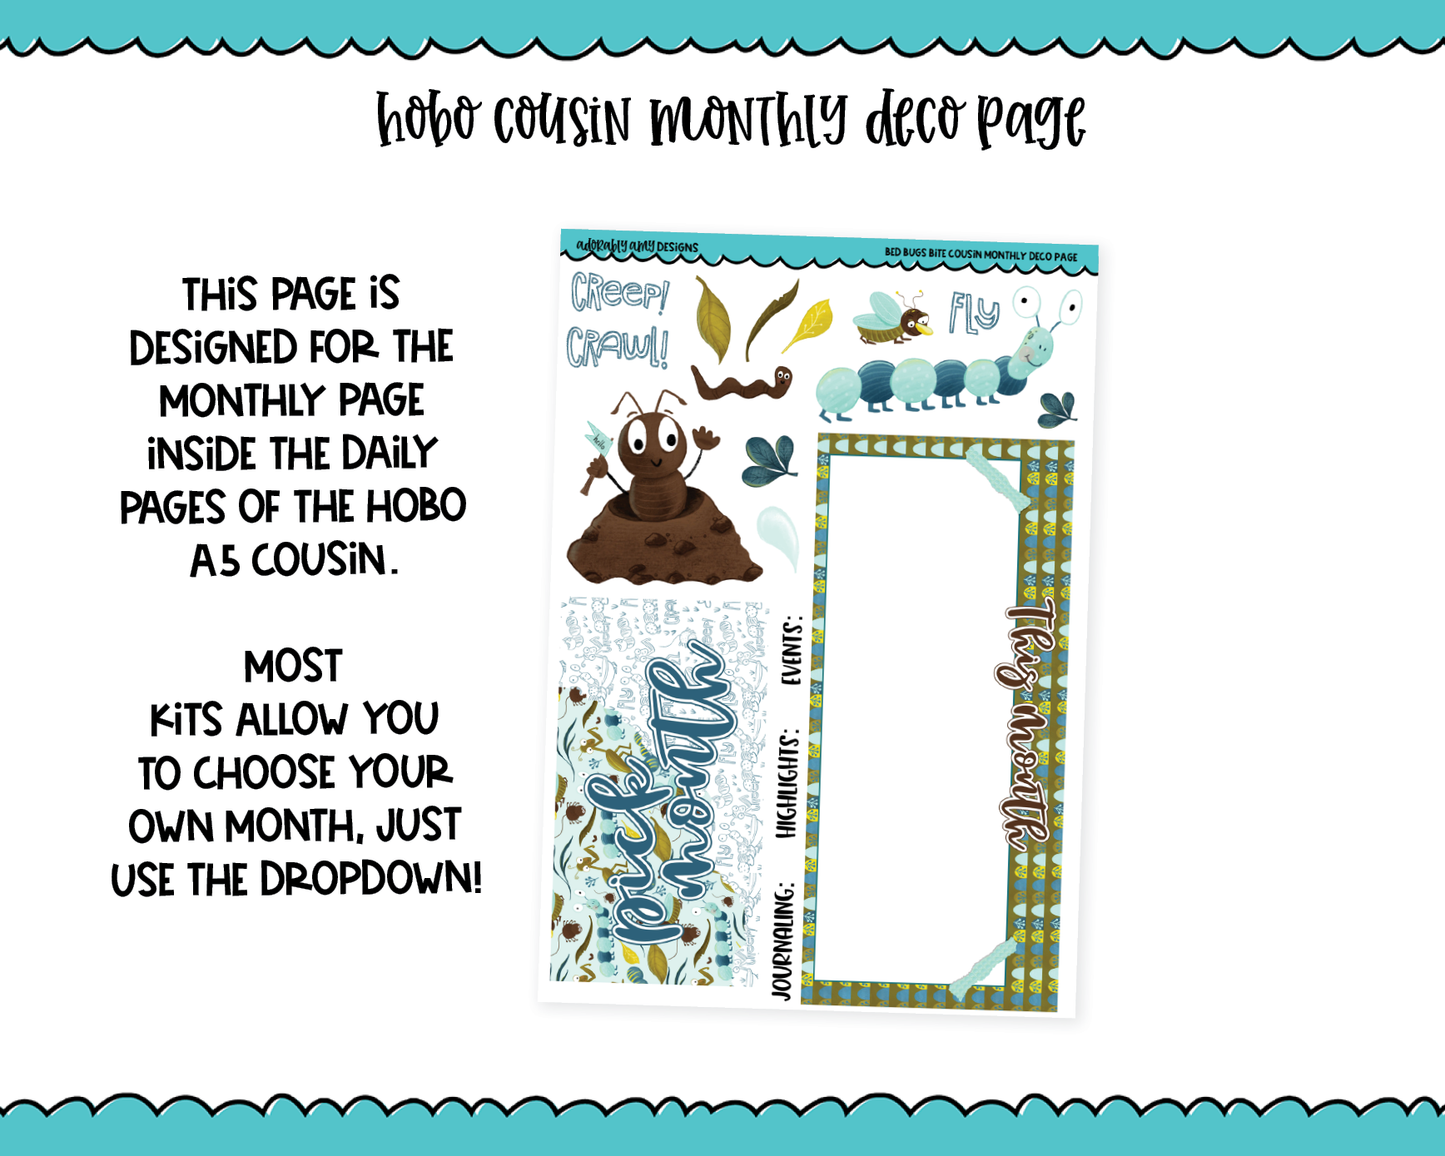 Hobonichi Cousin Monthly Pick Your Month Bed Bugs Themed Planner Sticker Kit for Hobo Cousin or Similar Planners